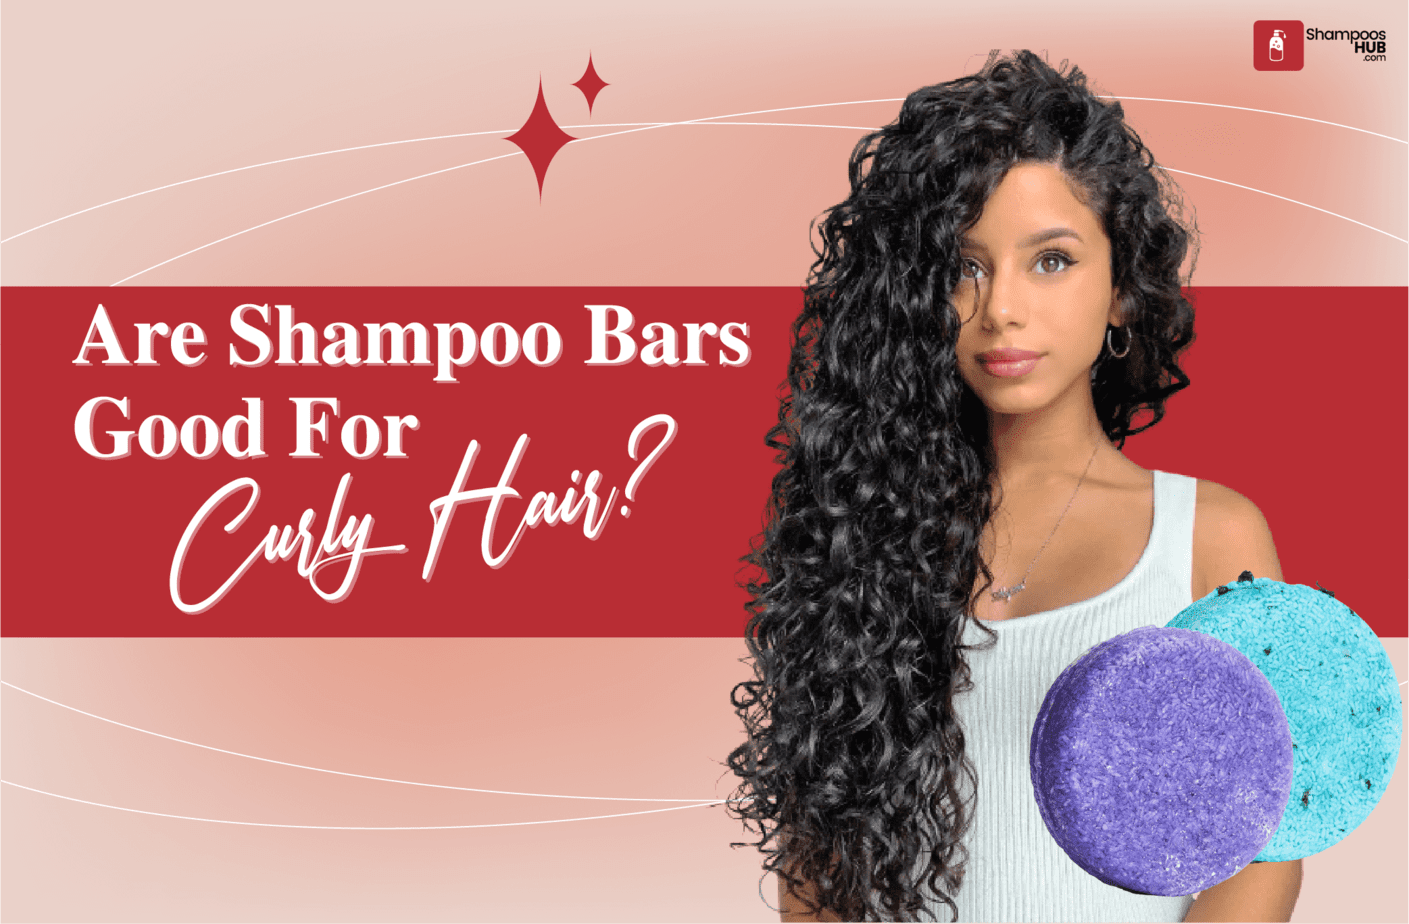 Are Shampoo Bars Good For Curly Hair?